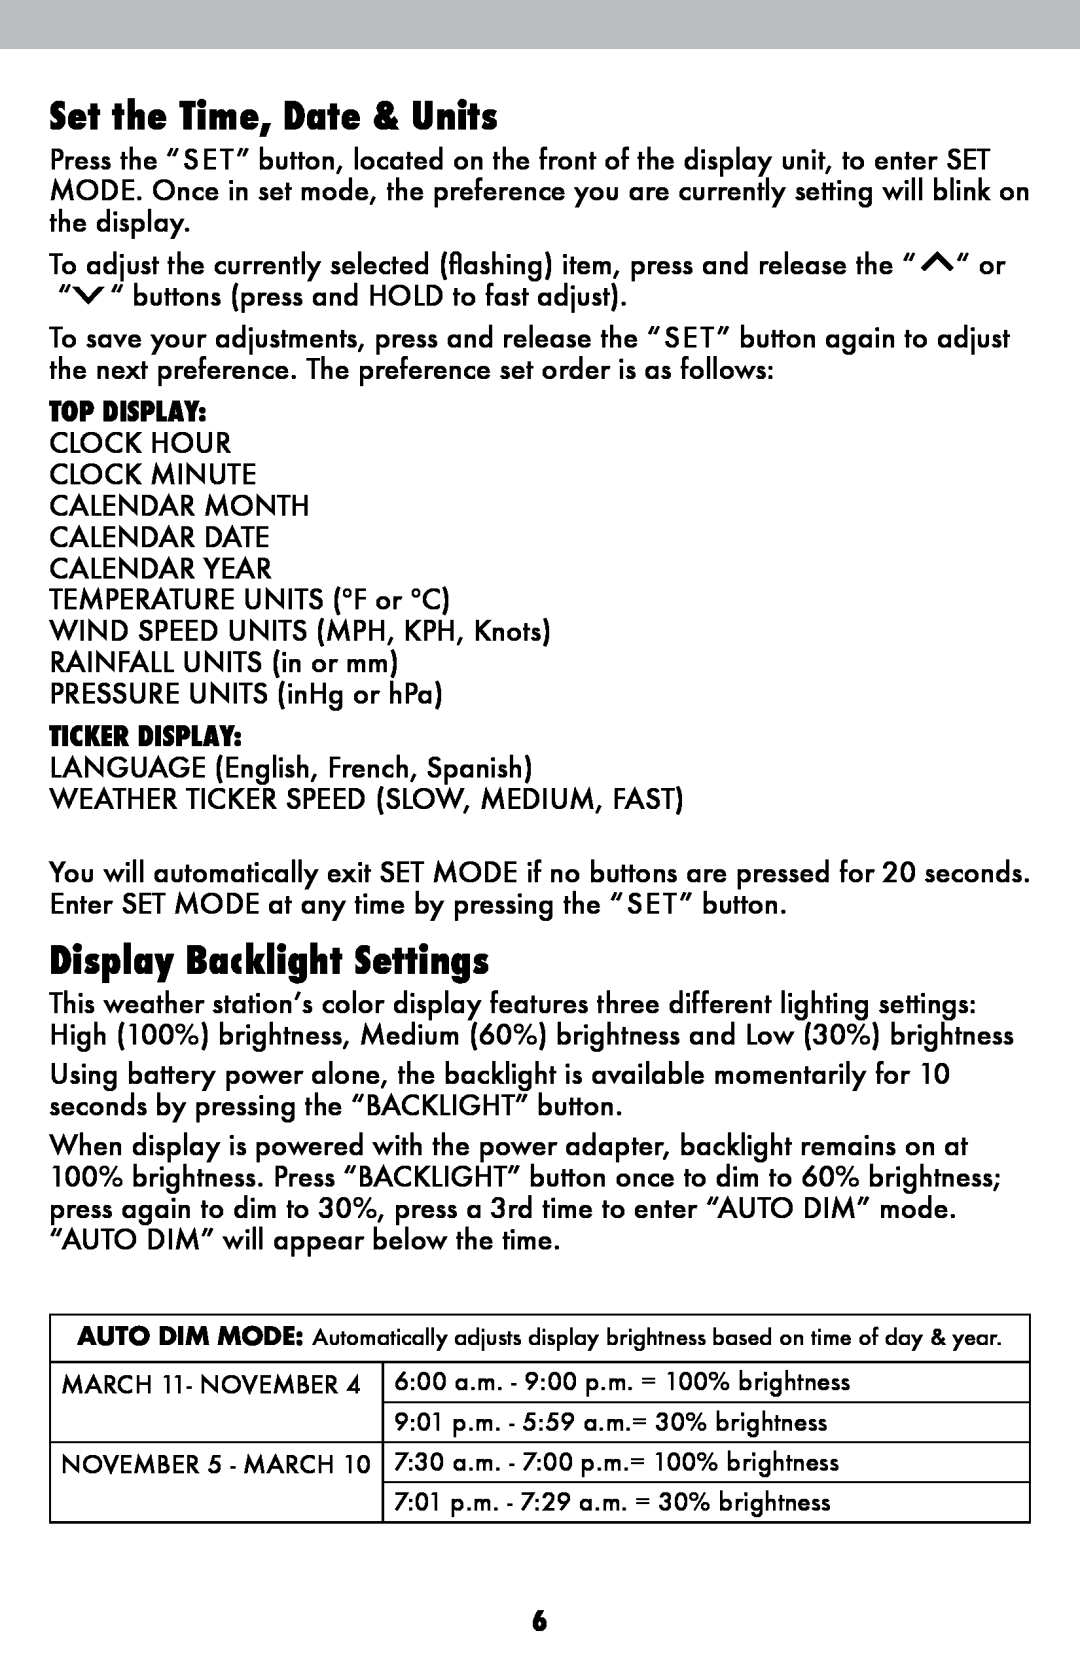 Acu-Rite 06016RM instruction manual Set the Time, Date & Units, Display Backlight Settings, Top Display, Ticker Display 